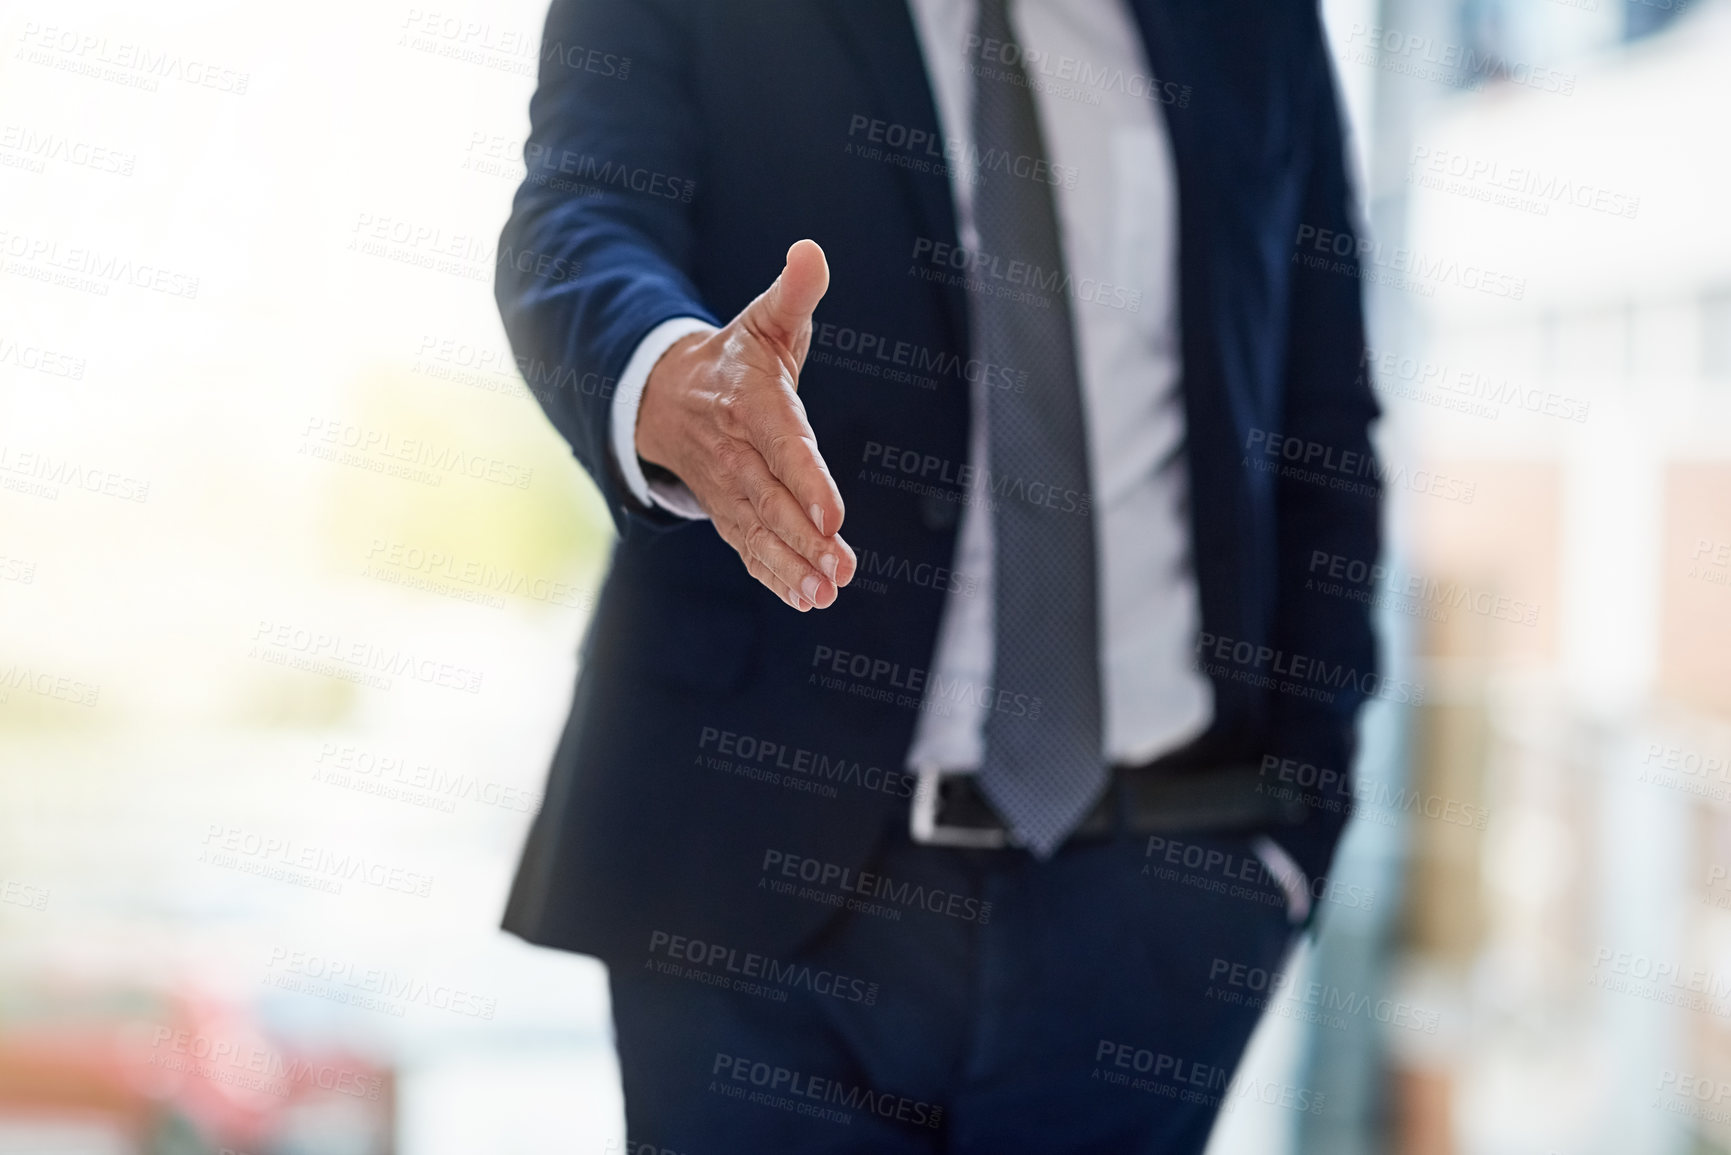 Buy stock photo Cropped shot of a businessman extending a handshake while standing in an office